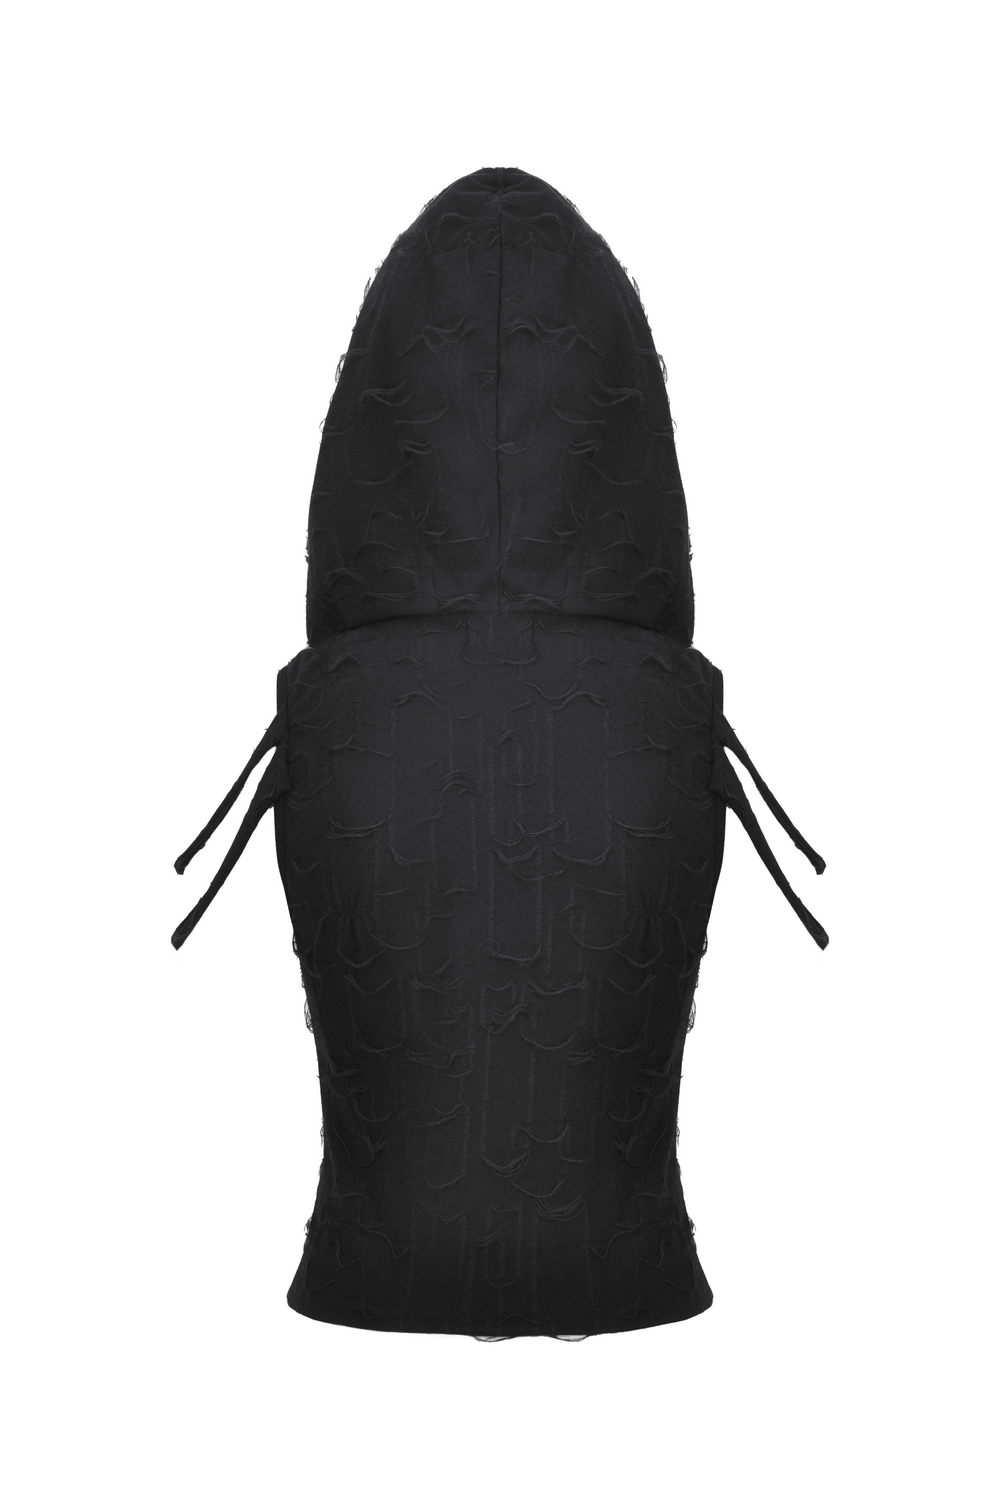 Gothic Hooded Top with Cutouts and Lace-Up Front